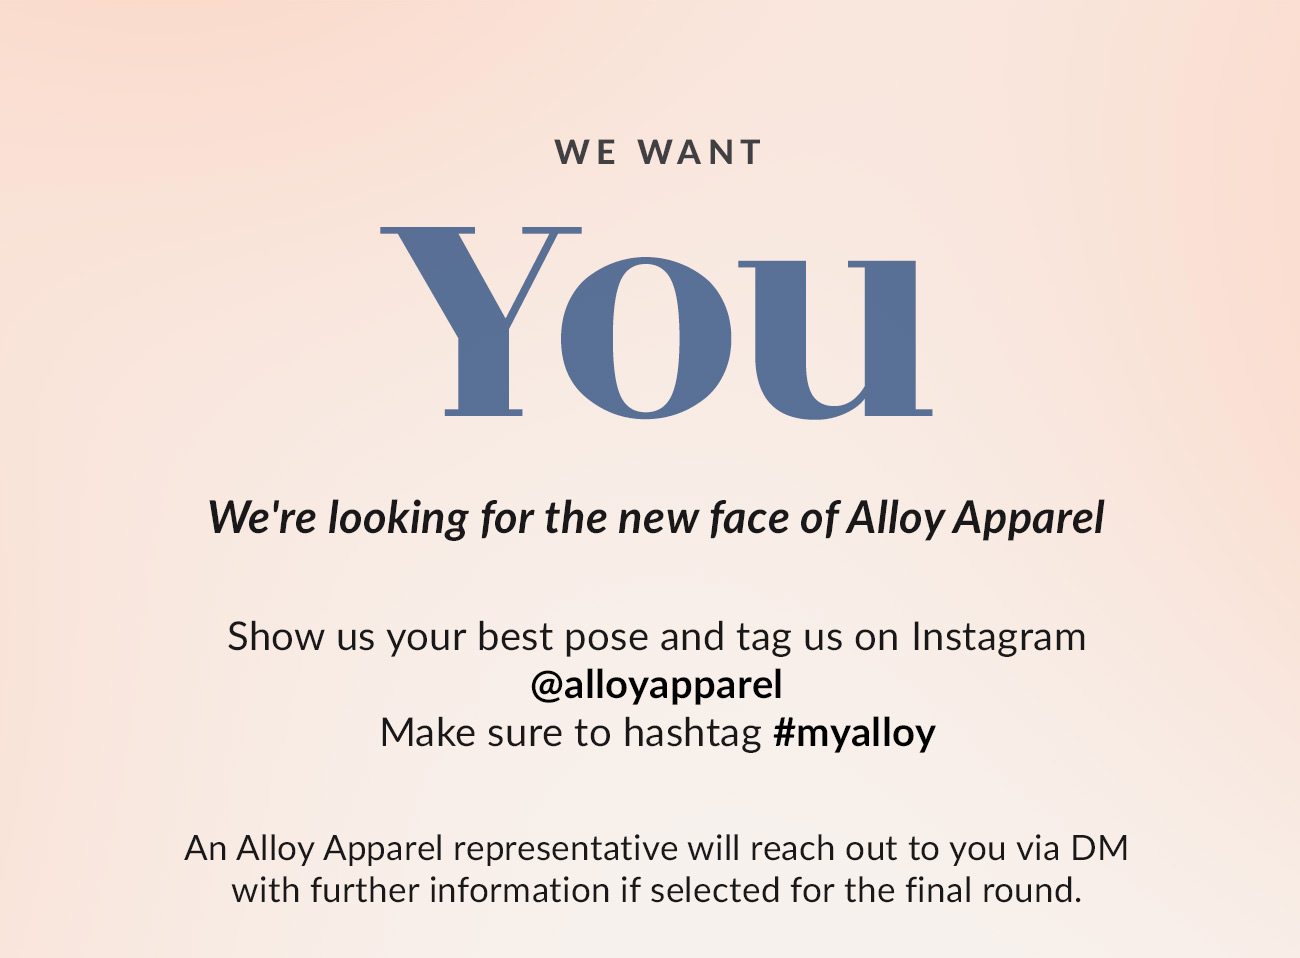 We Want You - We're looking for the new face of Alloy Apparel